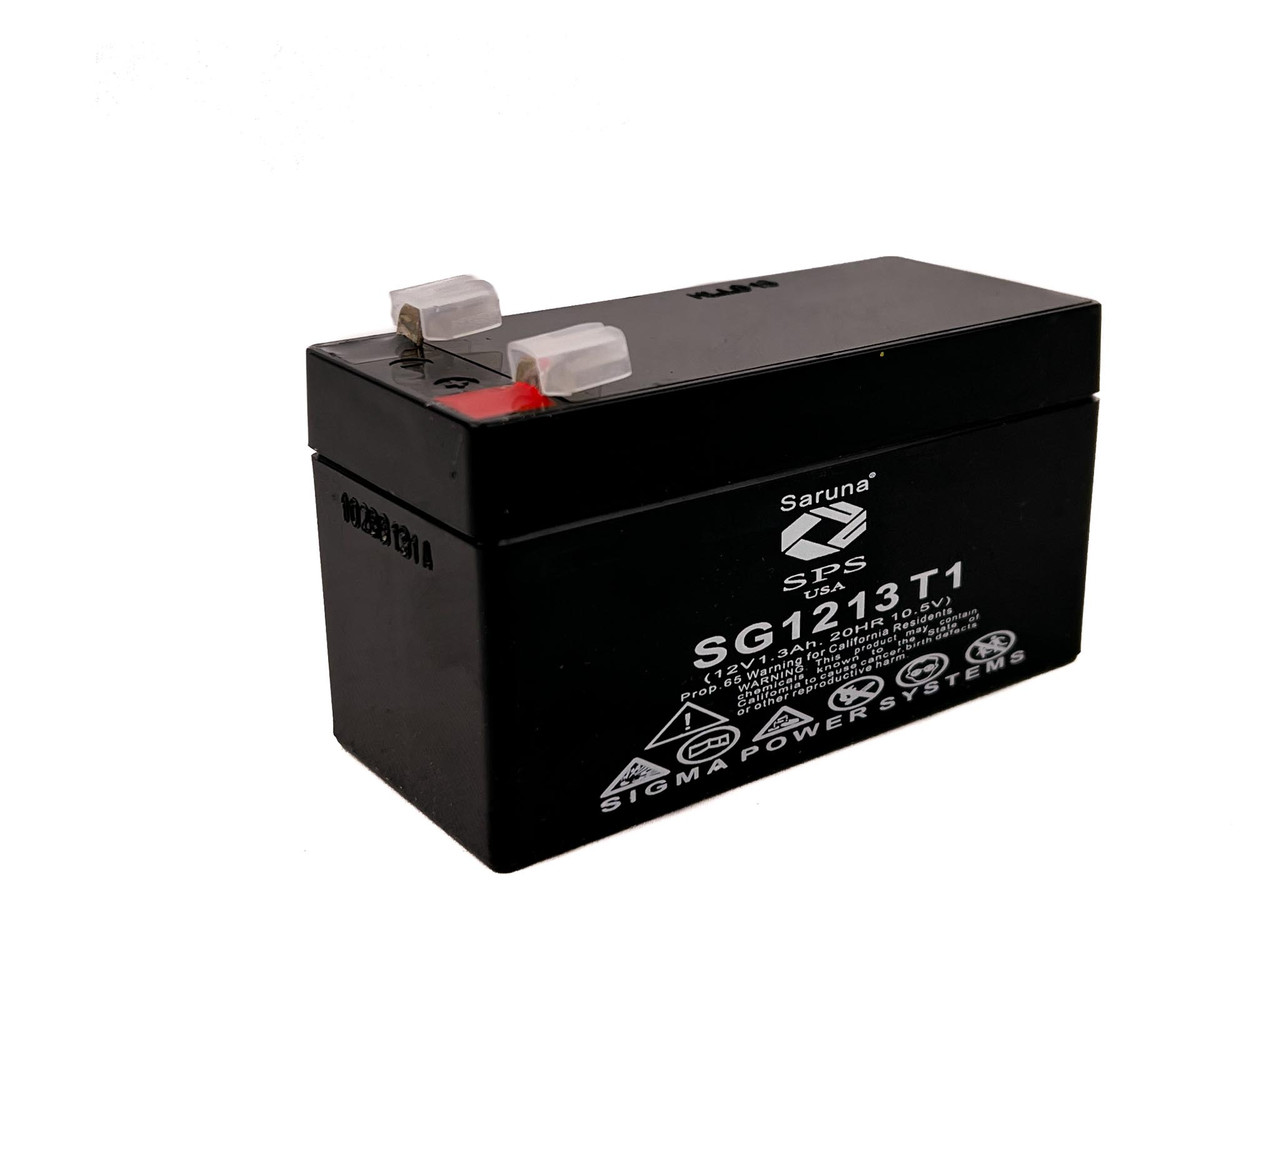 Raion Power 12V 1.3Ah Non-Spillable Replacement Rechargebale Battery for 2014 Freelander 2 17C635 BJ32-19G207C-AA